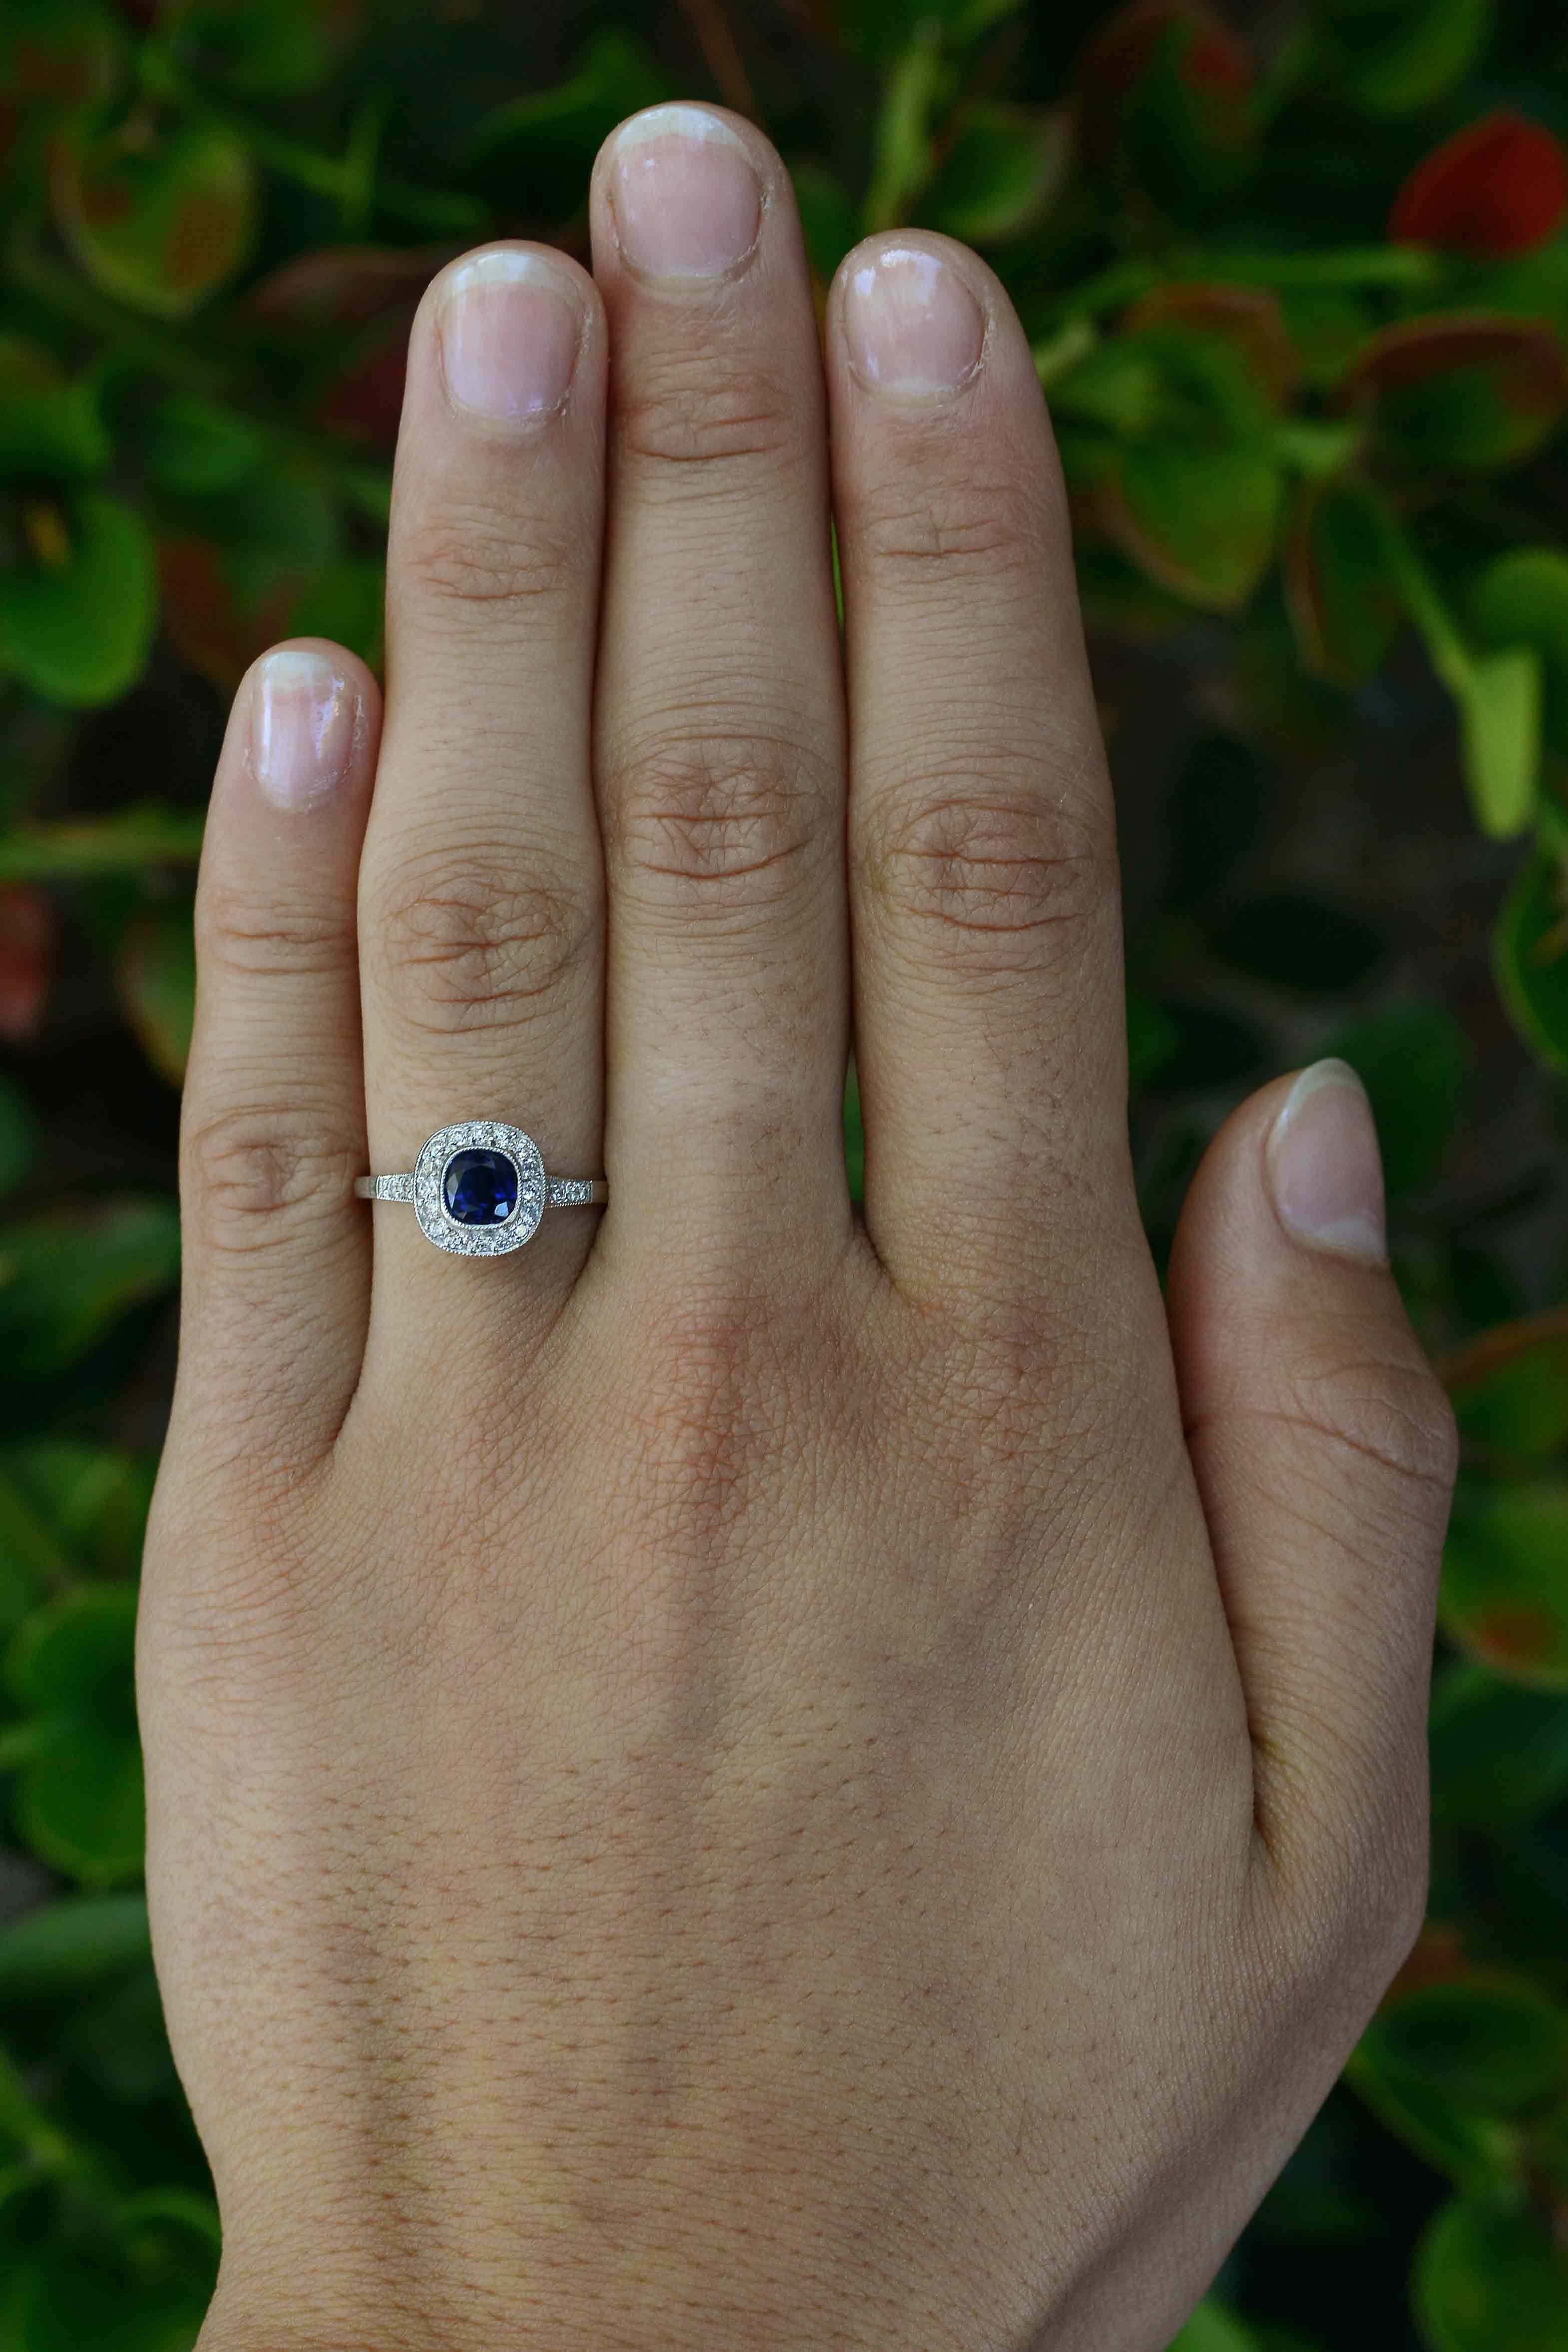 Crafted of everlasting platinum and set in a milgrain bezel is a rich and luminous antique blue sapphire that floats within a shimmering diamond halo. A wonderful and desirable cushion cut gemstone engagement ring. Supporting the filigree, scrolled